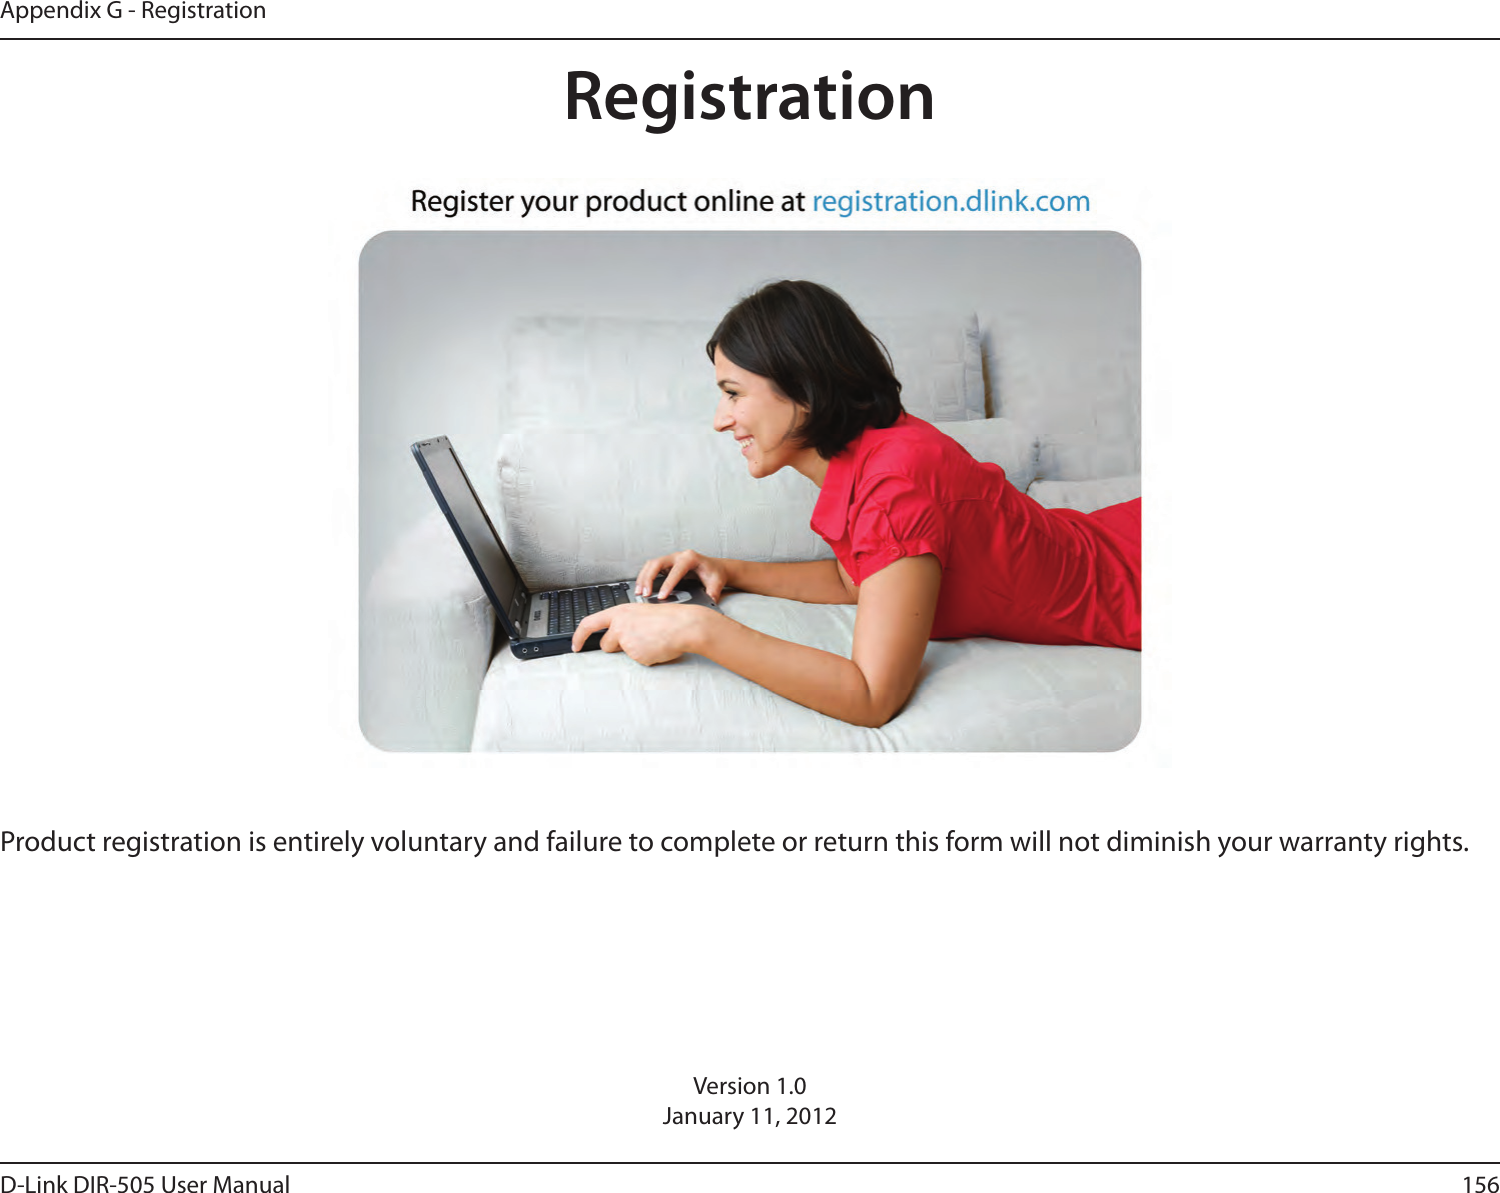 156D-Link DIR-505 User ManualAppendix G - RegistrationVersion 1.0January 11, 2012Product registration is entirely voluntary and failure to complete or return this form will not diminish your warranty rights.Registration